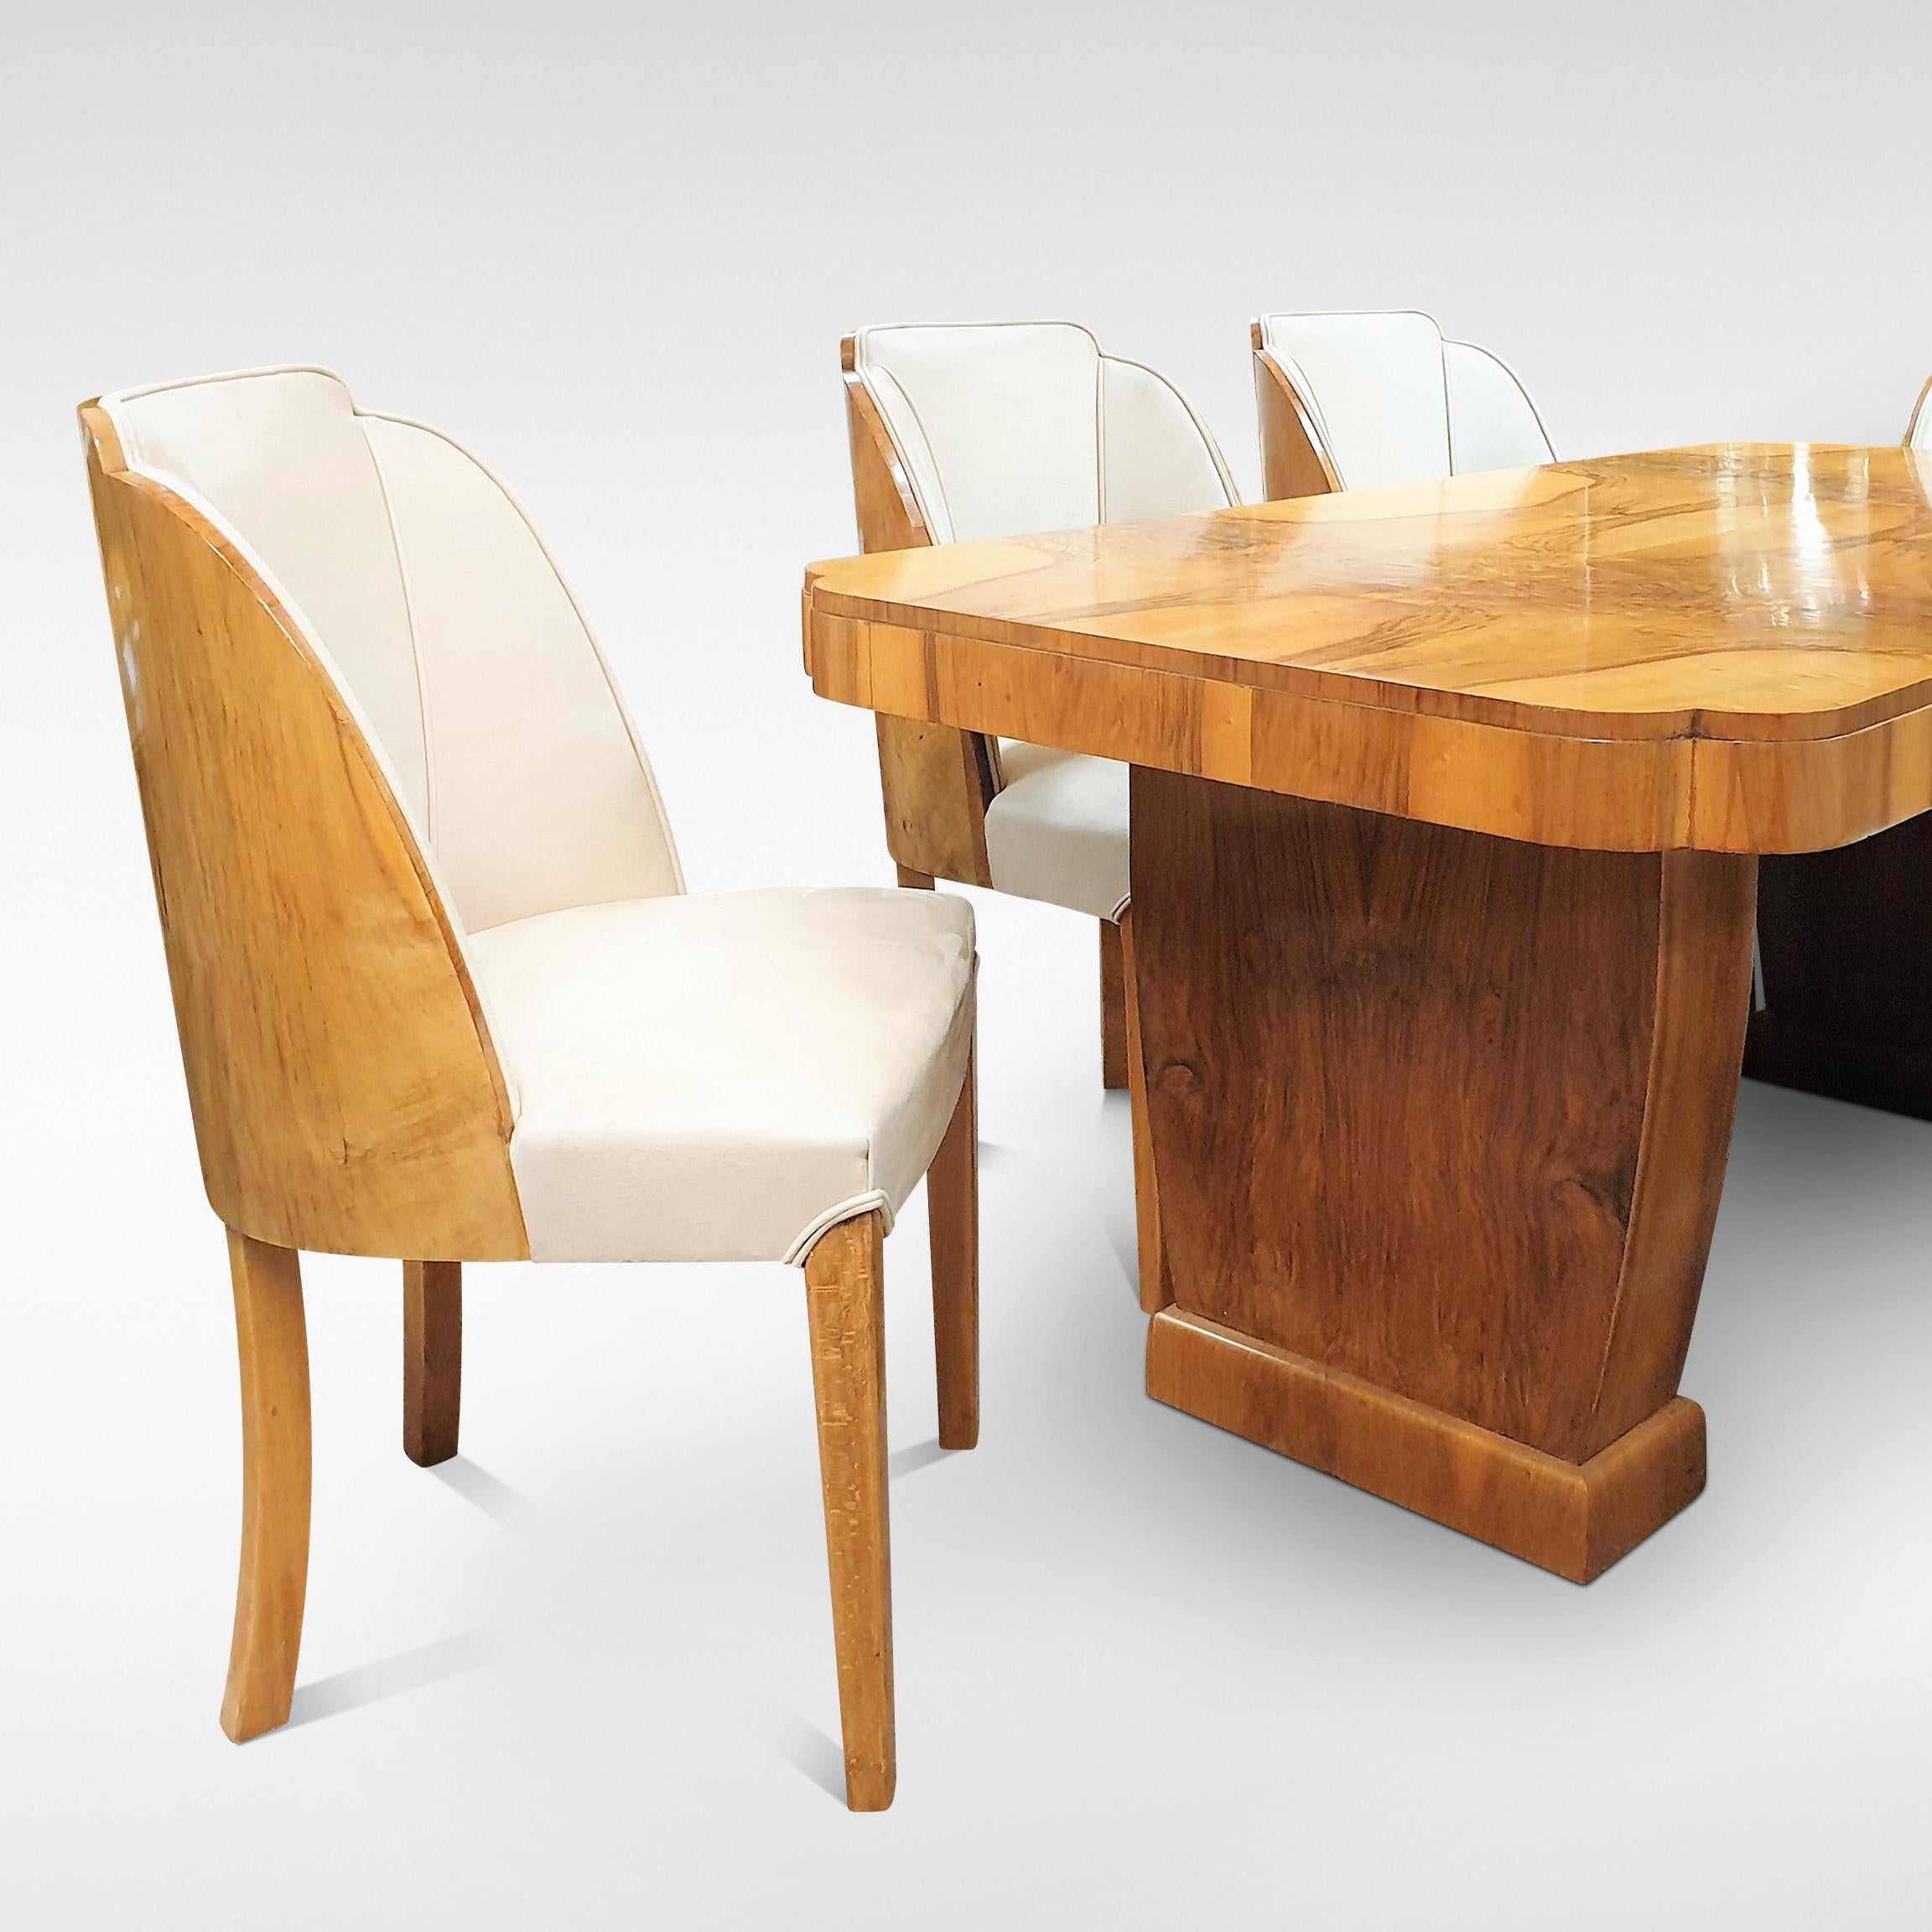 English Art Deco Epstein Cloud Dining Suite, circa 1930s For Sale